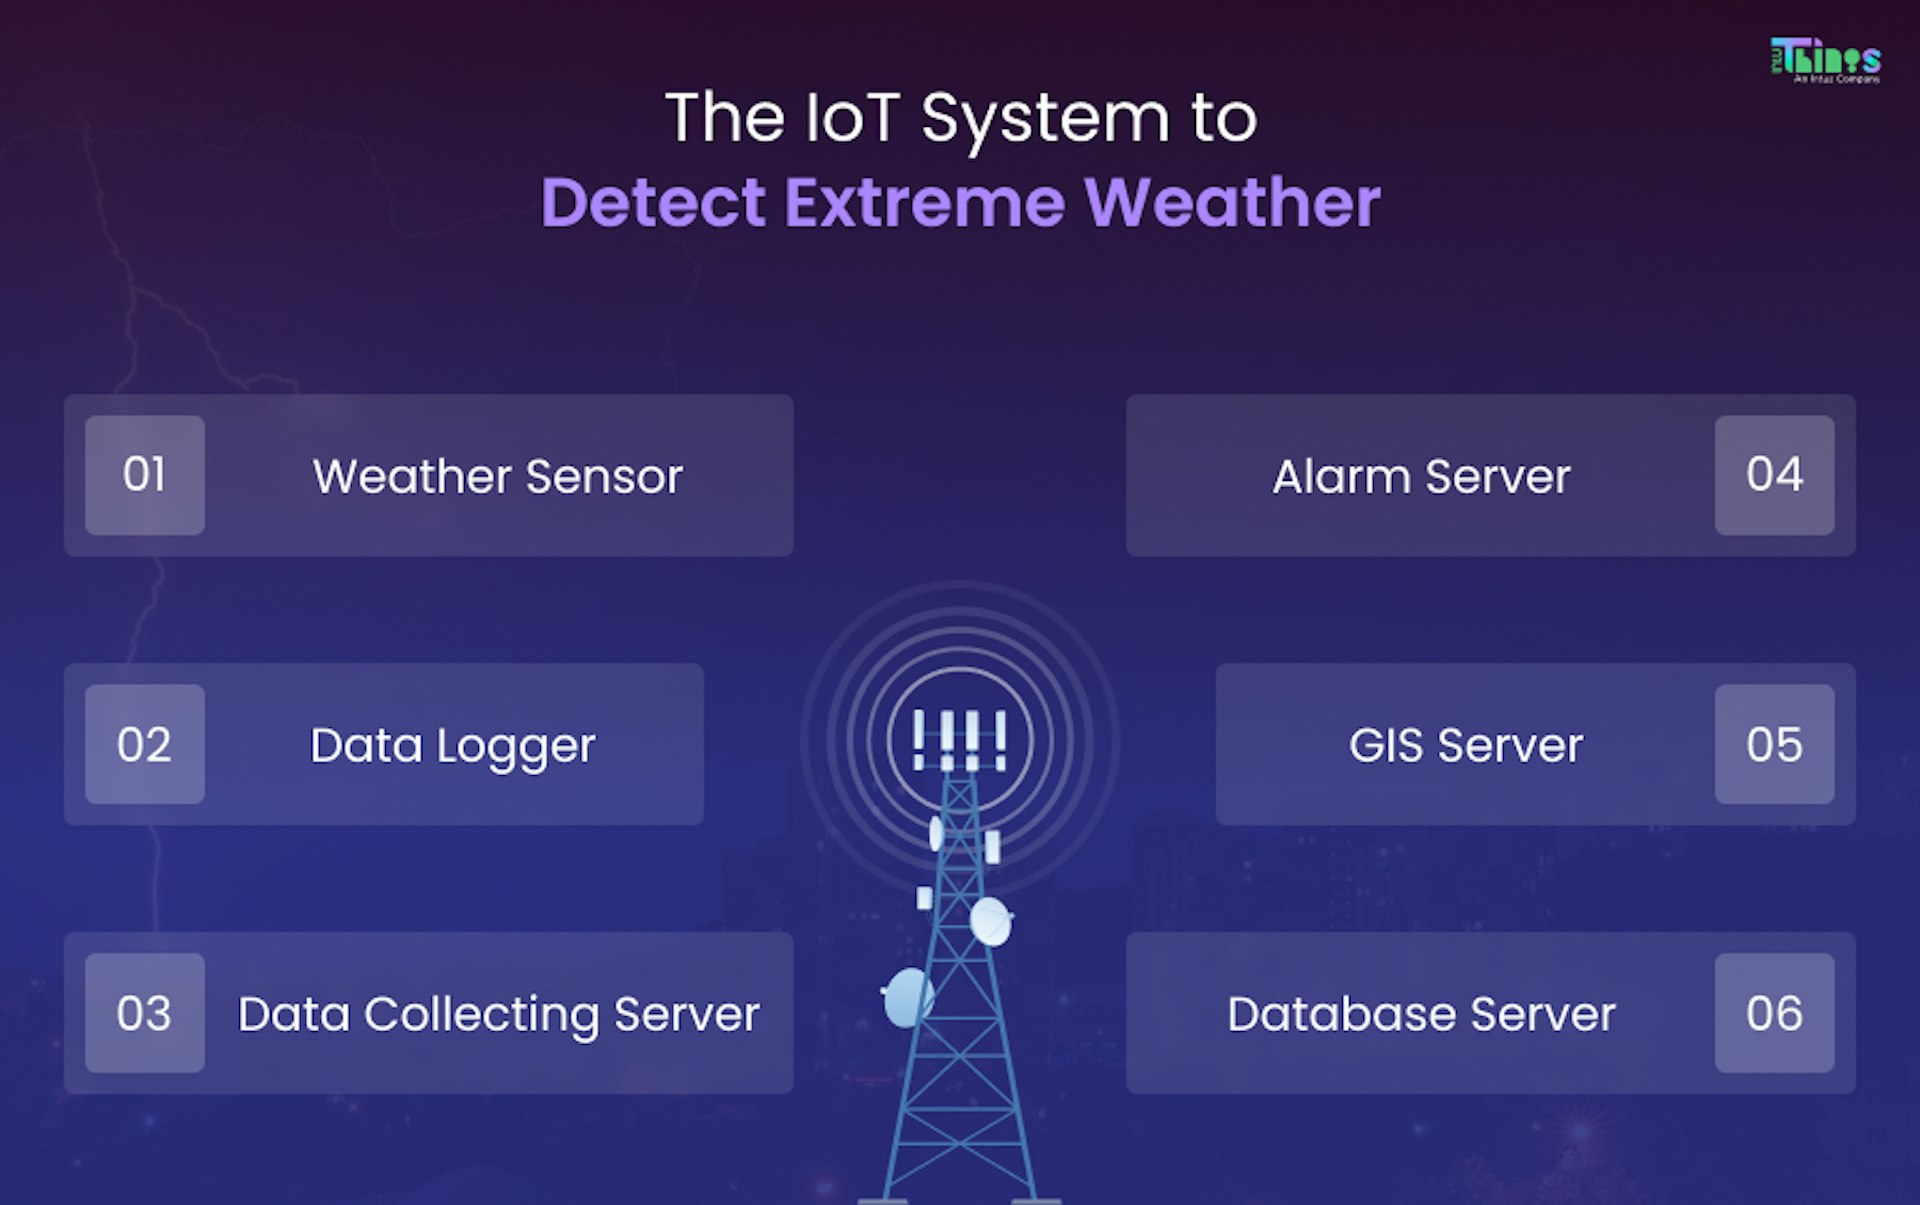 IoT system components to detect extreme weather